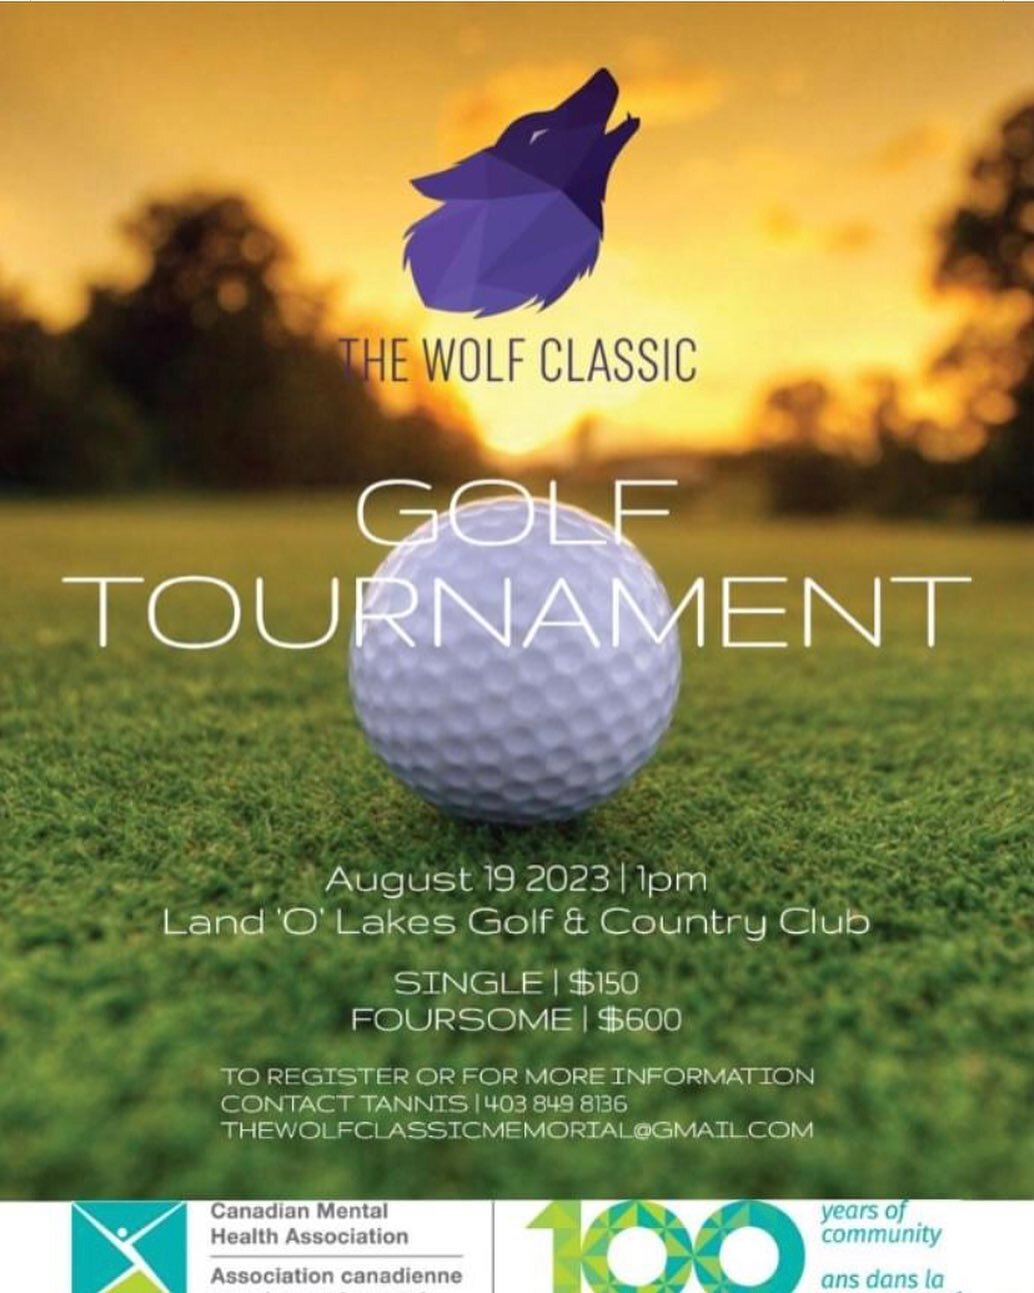 It&rsquo;s the 4th annual Wolf Classic Memorial Golf Tournament in support of the Canadian Mental Health Association. 

The purpose of this tournament will be raising awareness and funds for the Canadian Mental Health Association which assists in cou